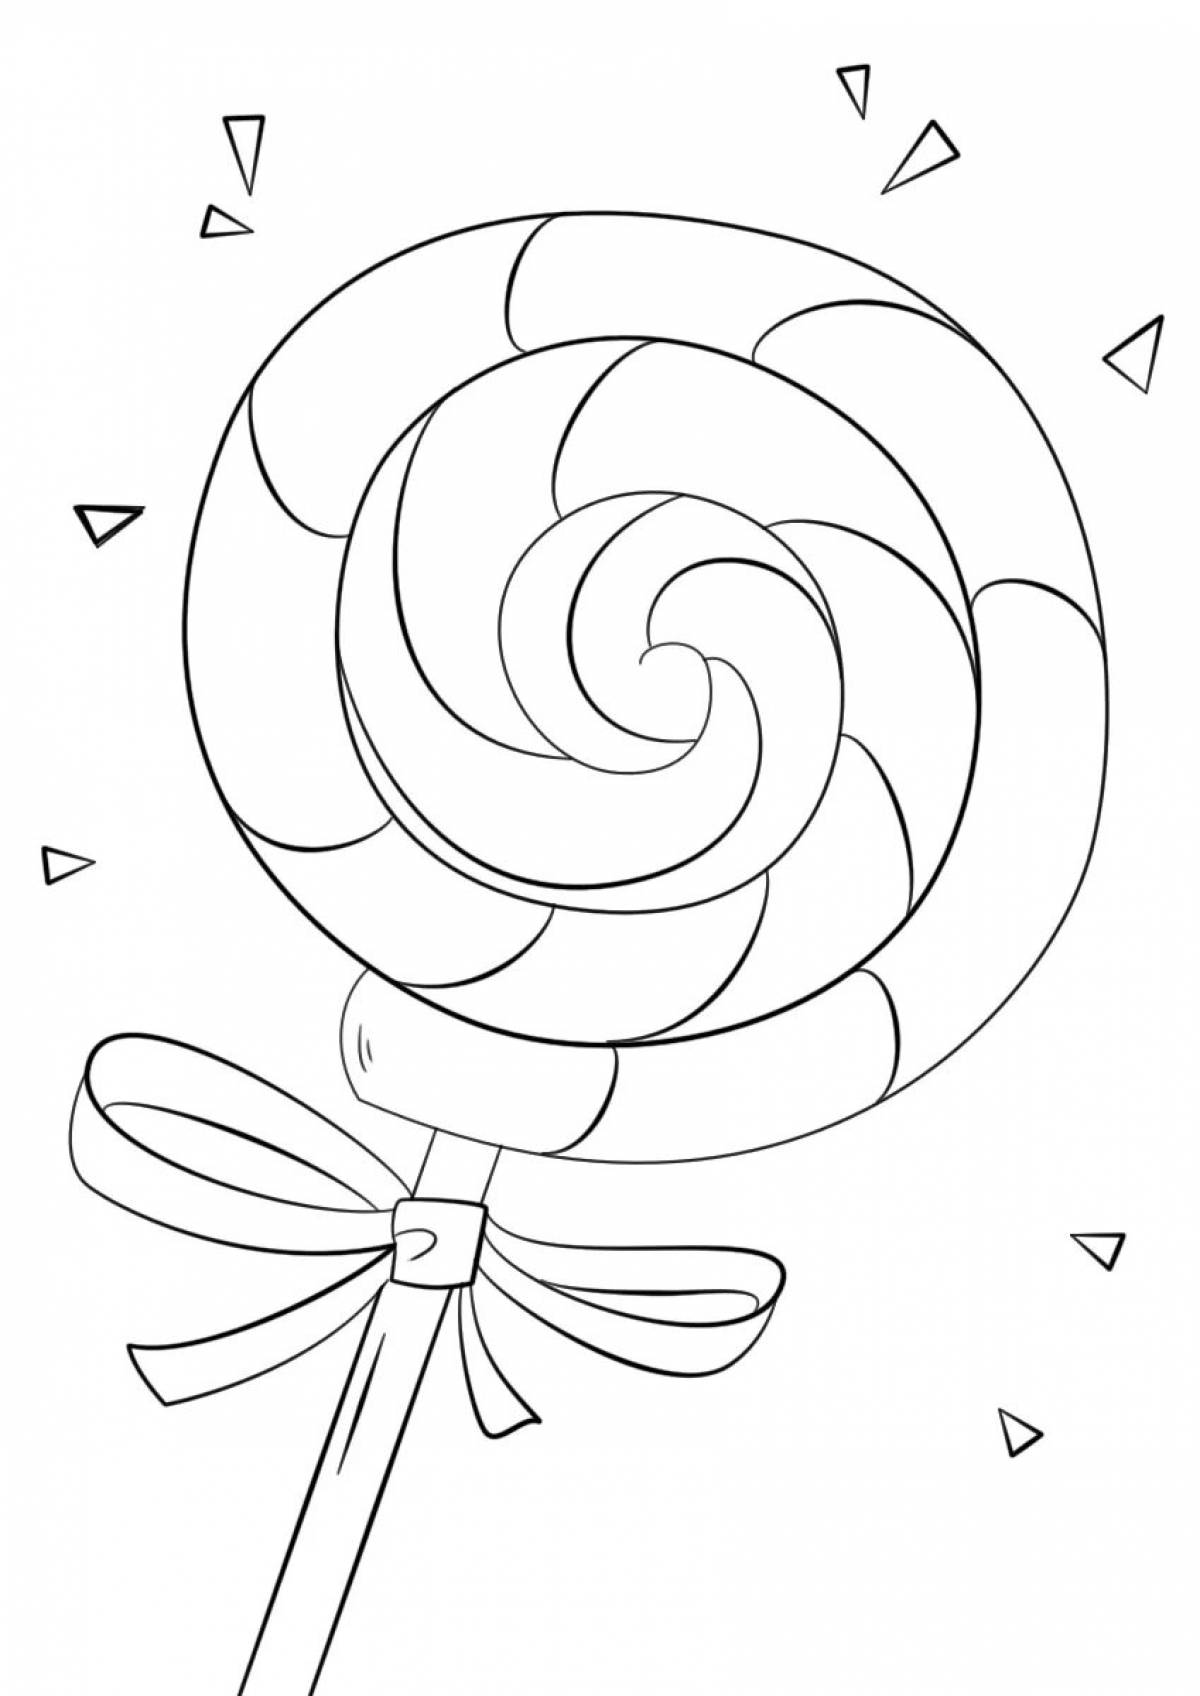 Fascinating candy coloring page